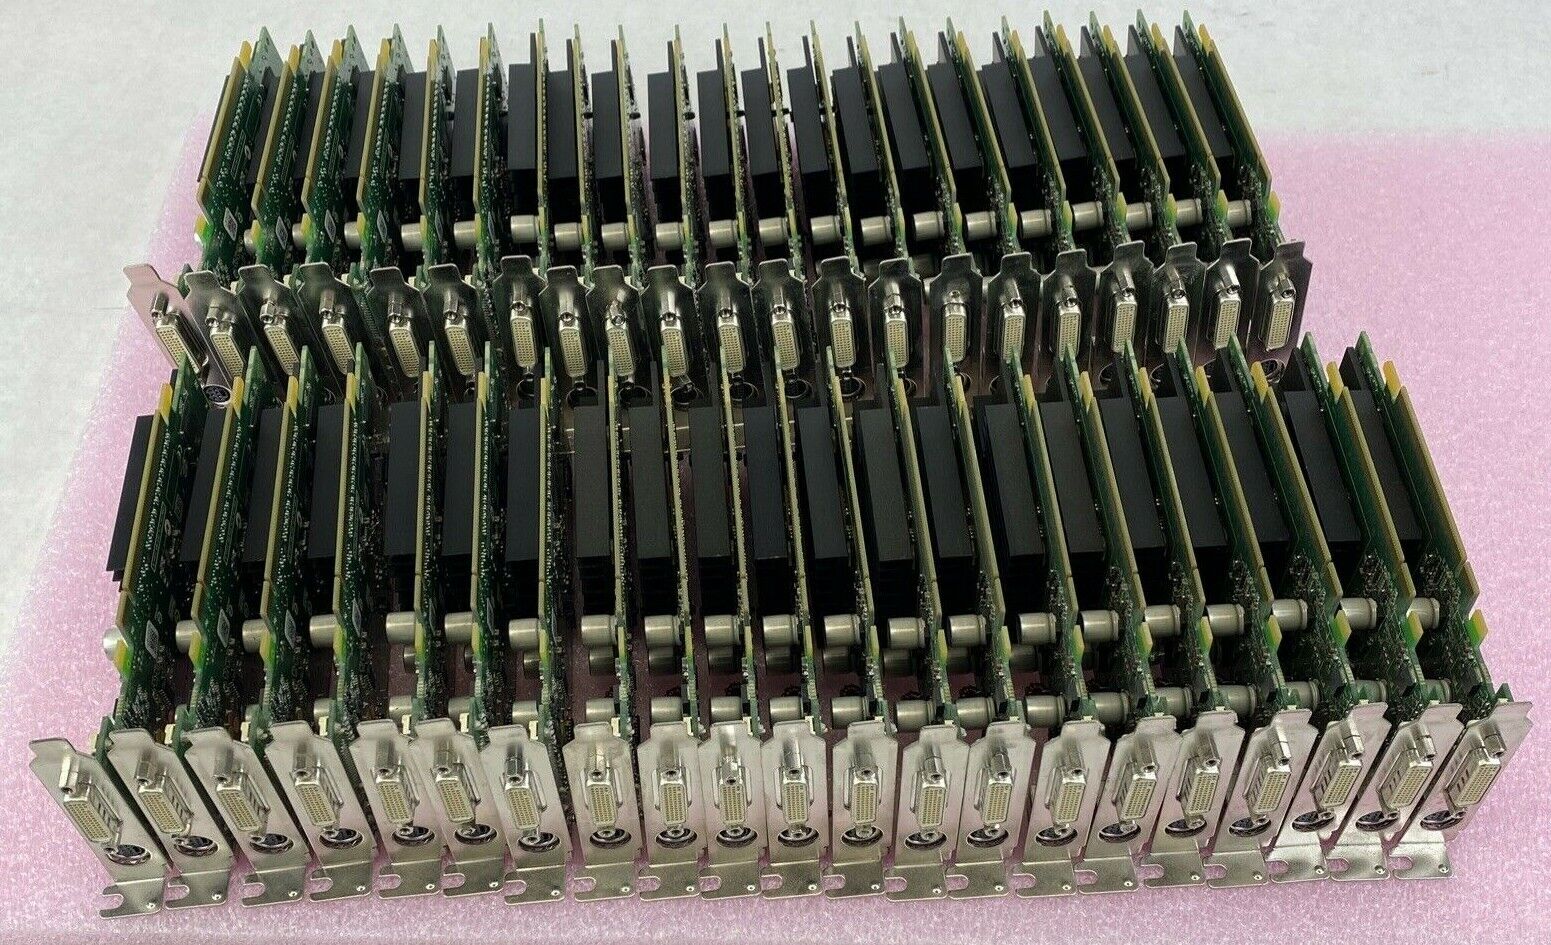 Lot of 42 GeForce 9300Ge NVIDIA 0N751G 256MB DDR2 DMS-59 video graphics cards